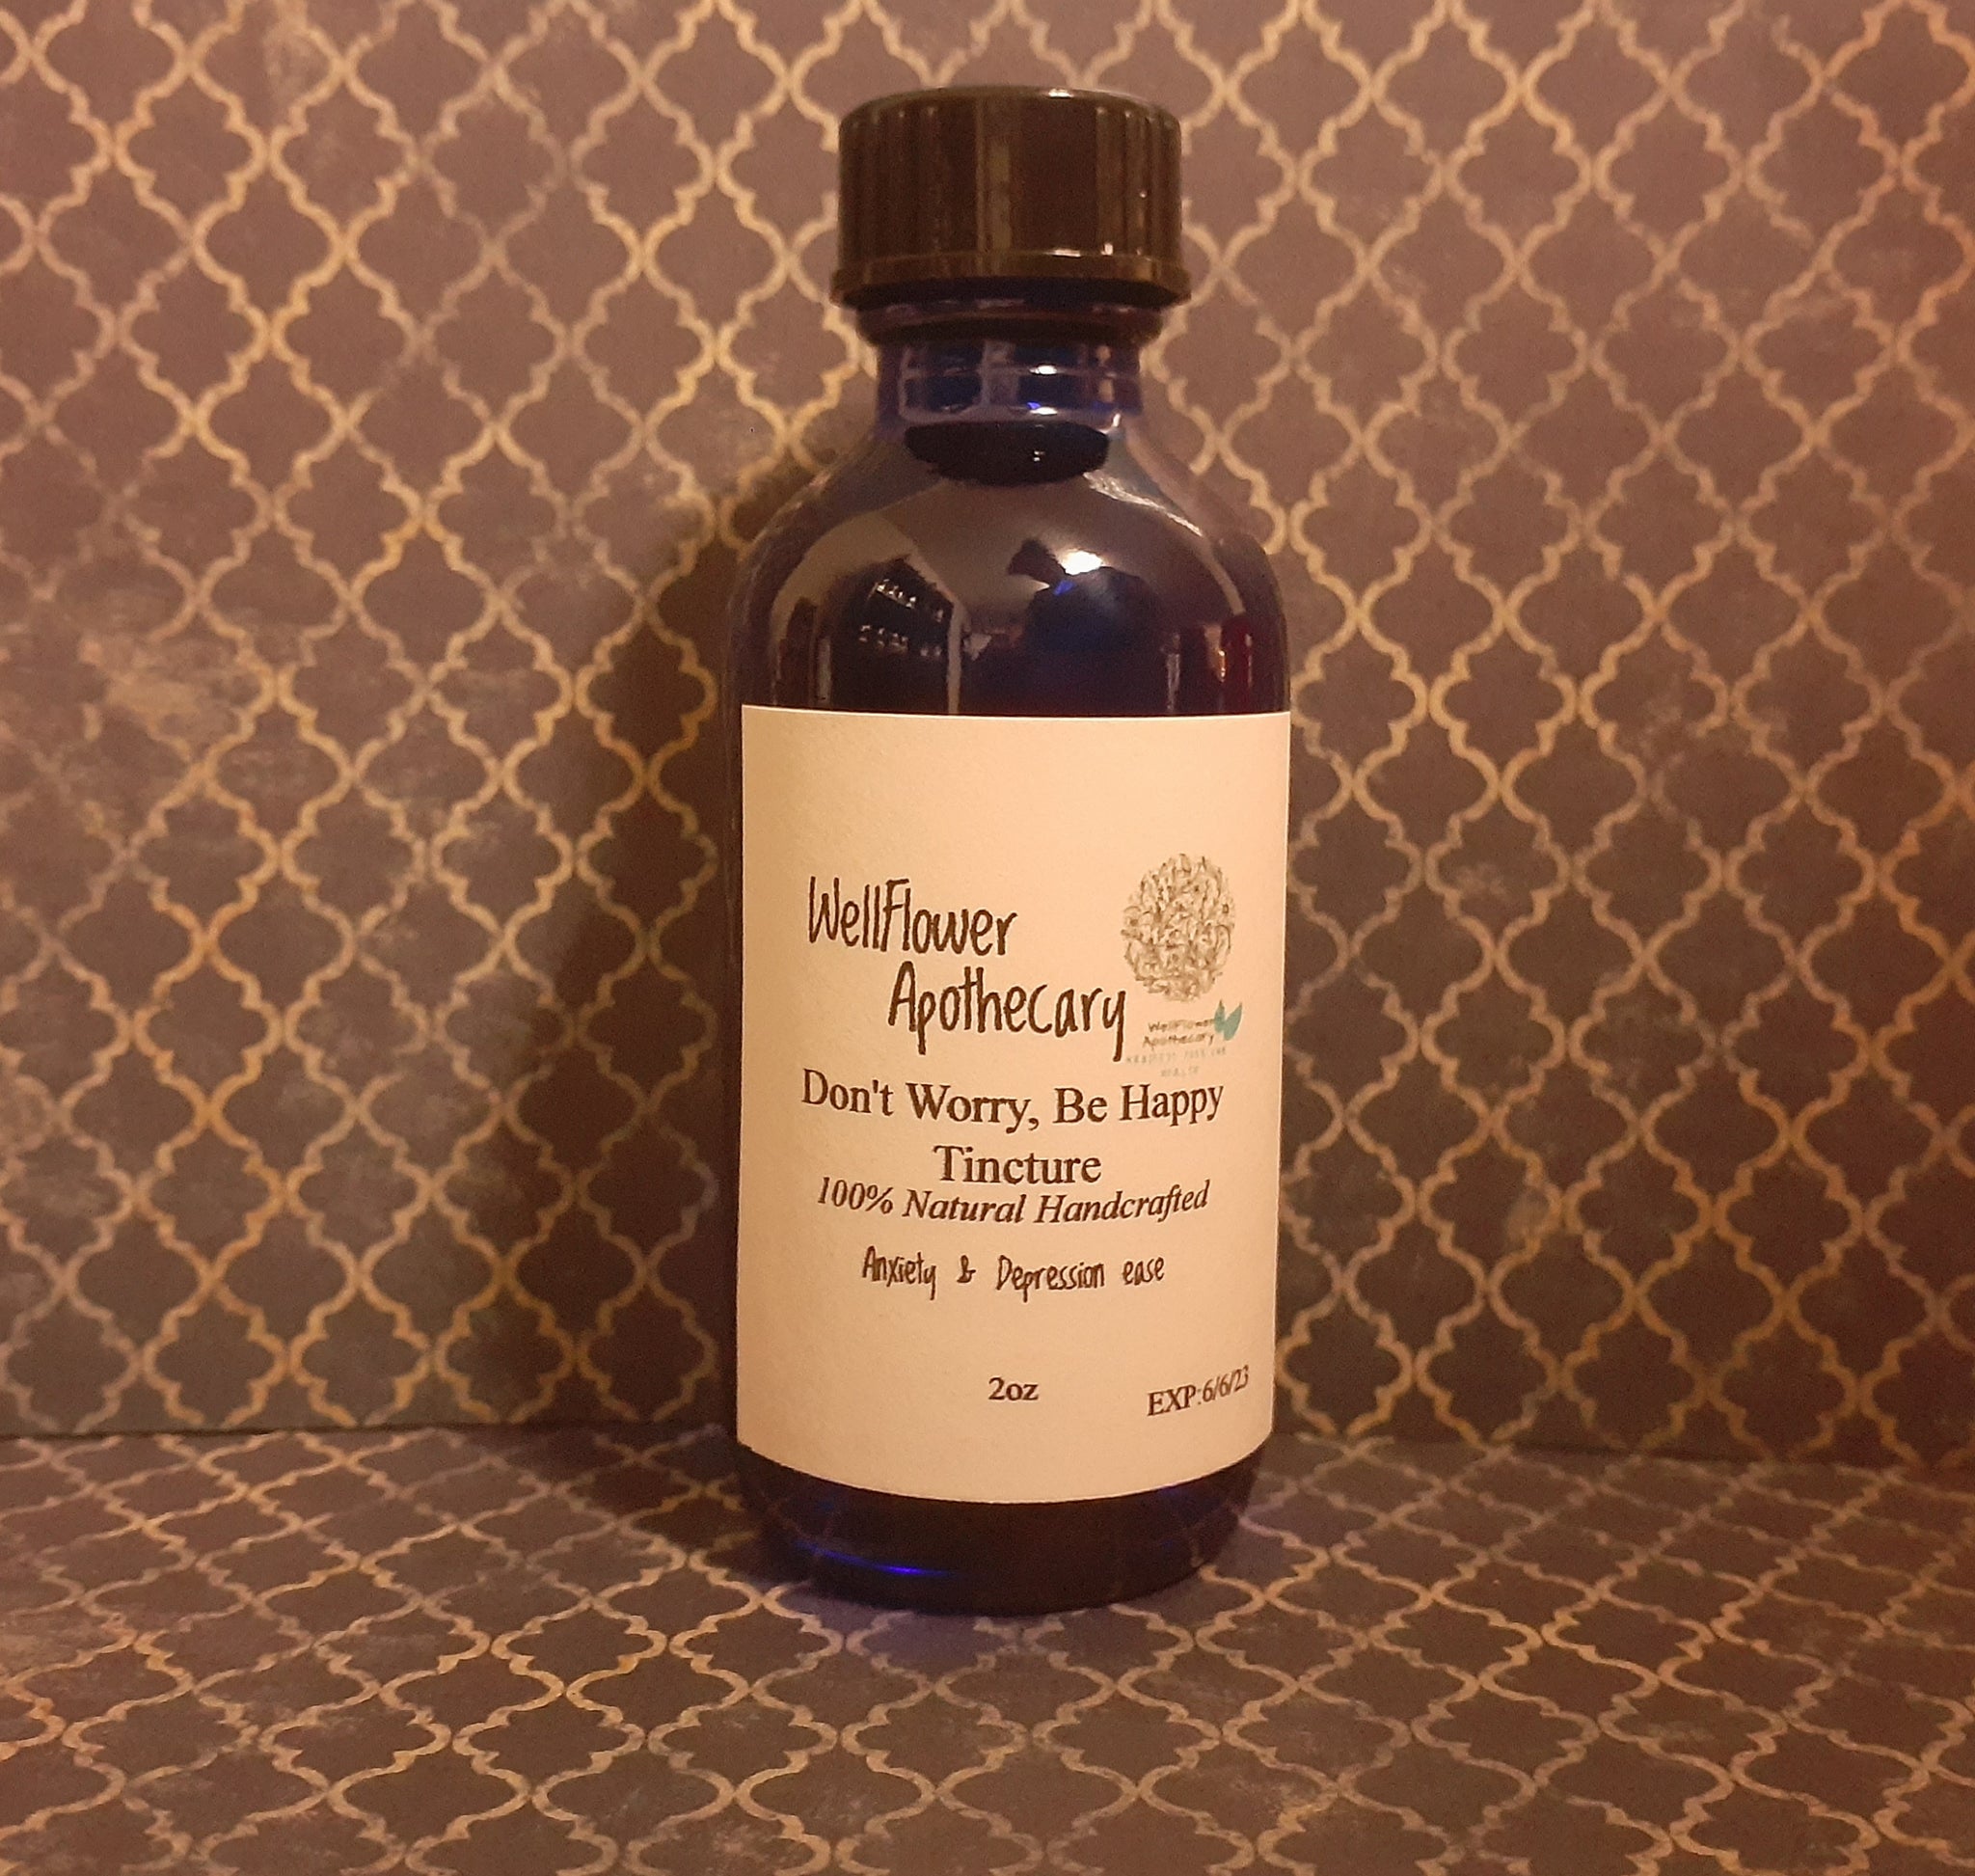 Dont Worry, Be Happy Tincture (Anxiety & Depression ease)- SHIPS 4/30/22